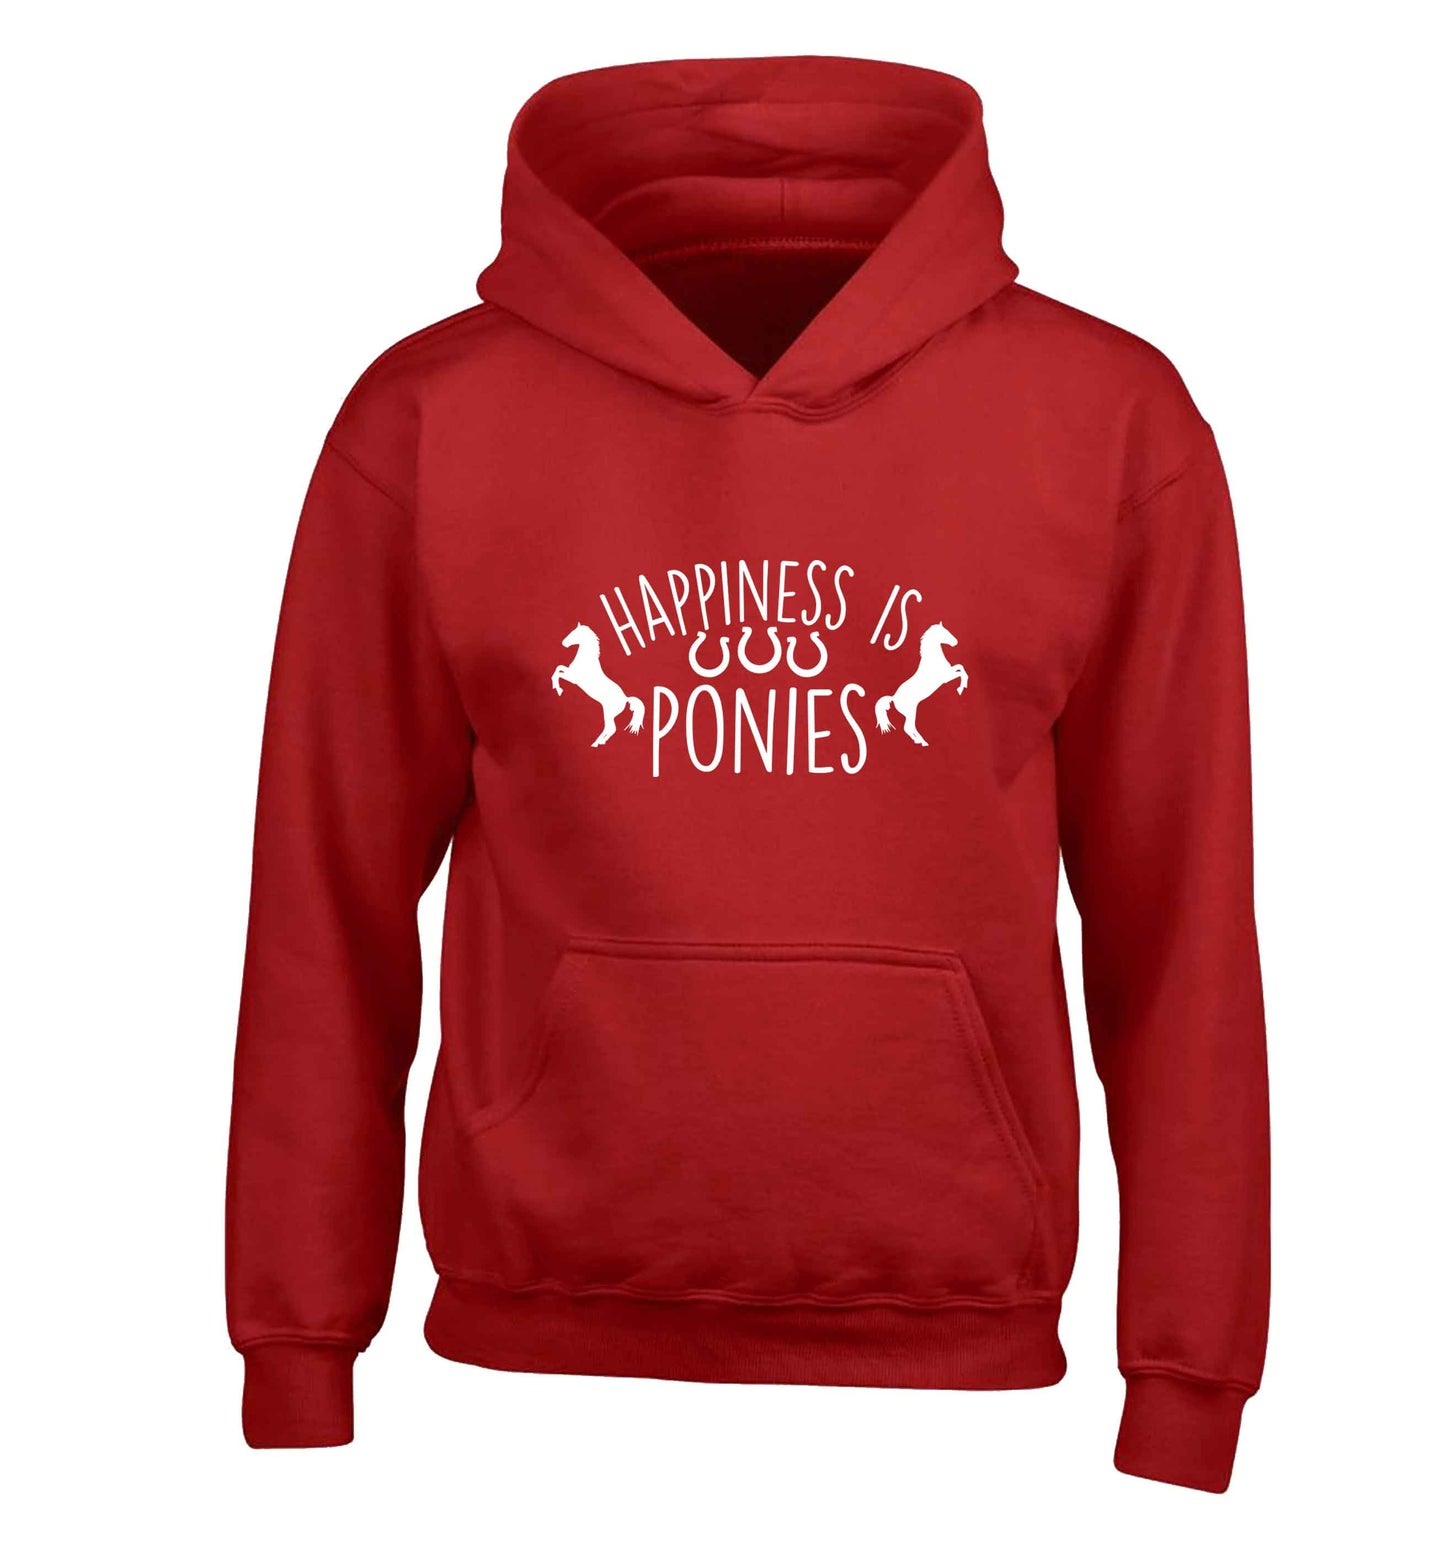 Happiness is ponies children's red hoodie 12-13 Years